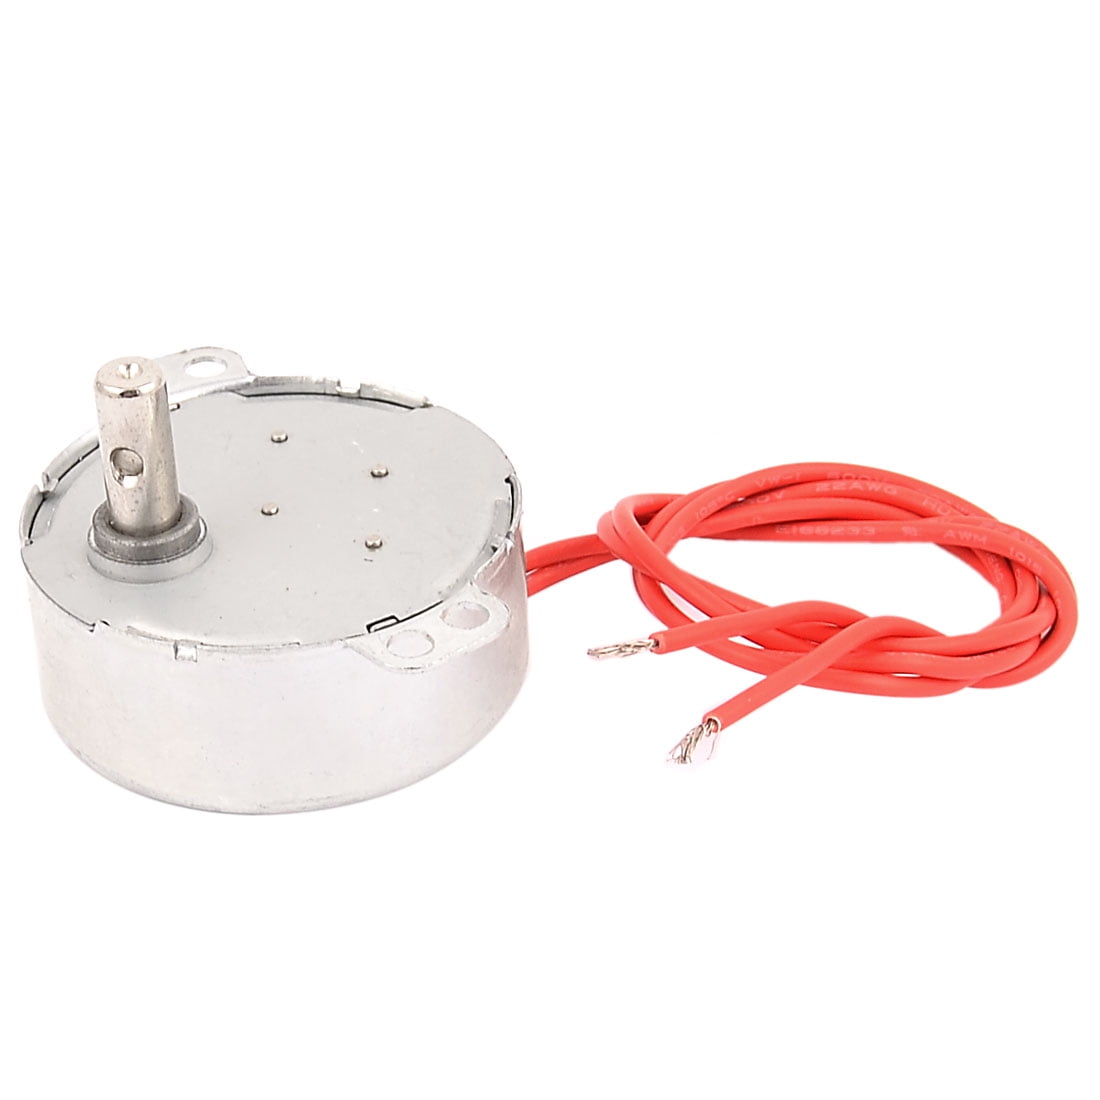 CCW/CW Direction 50/60Hz Frequency 8-10RPM Synchronous Motor AC 220-240V 4W TOOGOO R